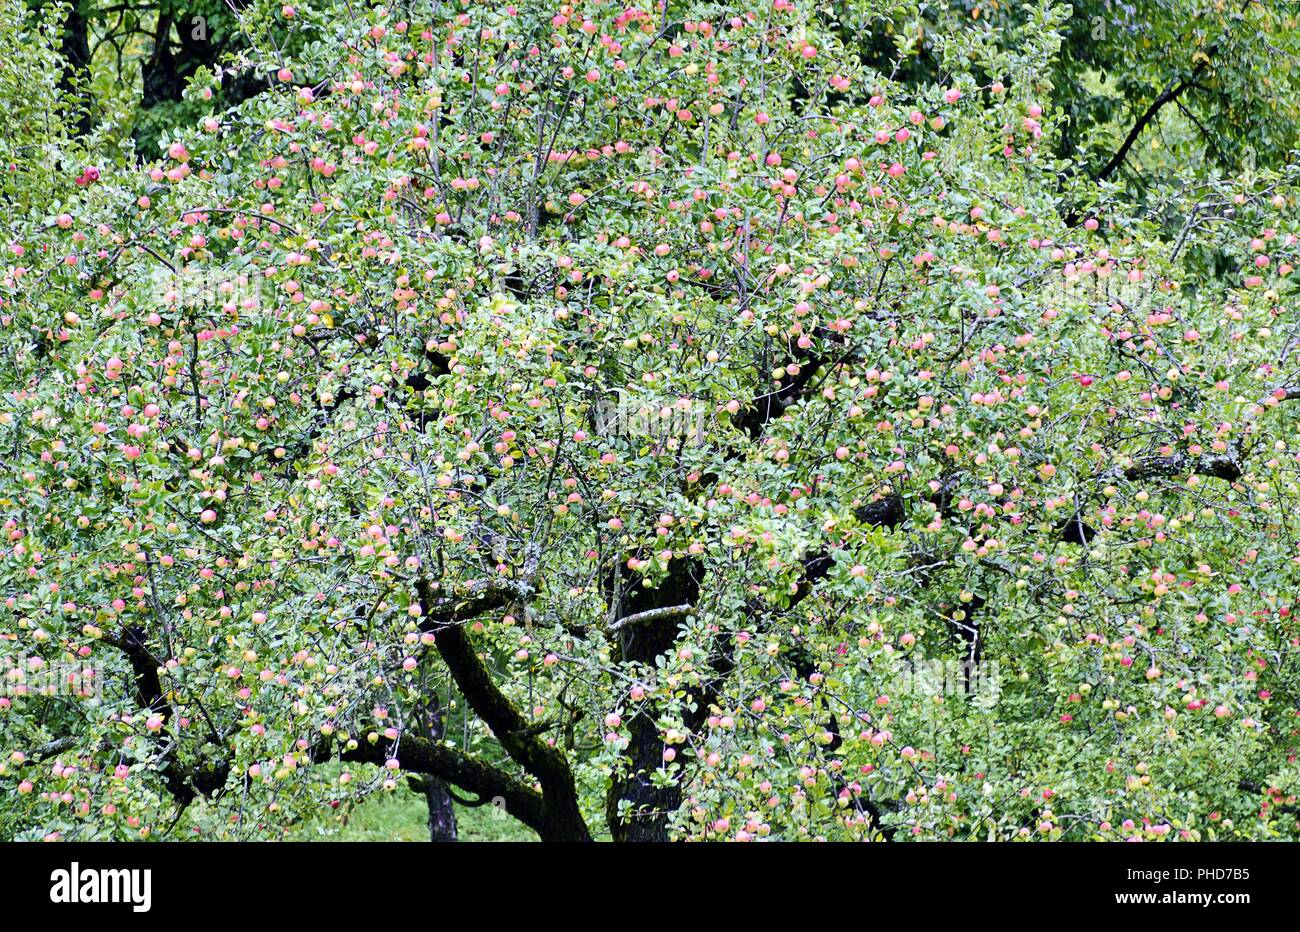 tree with pink apples Stock Photo